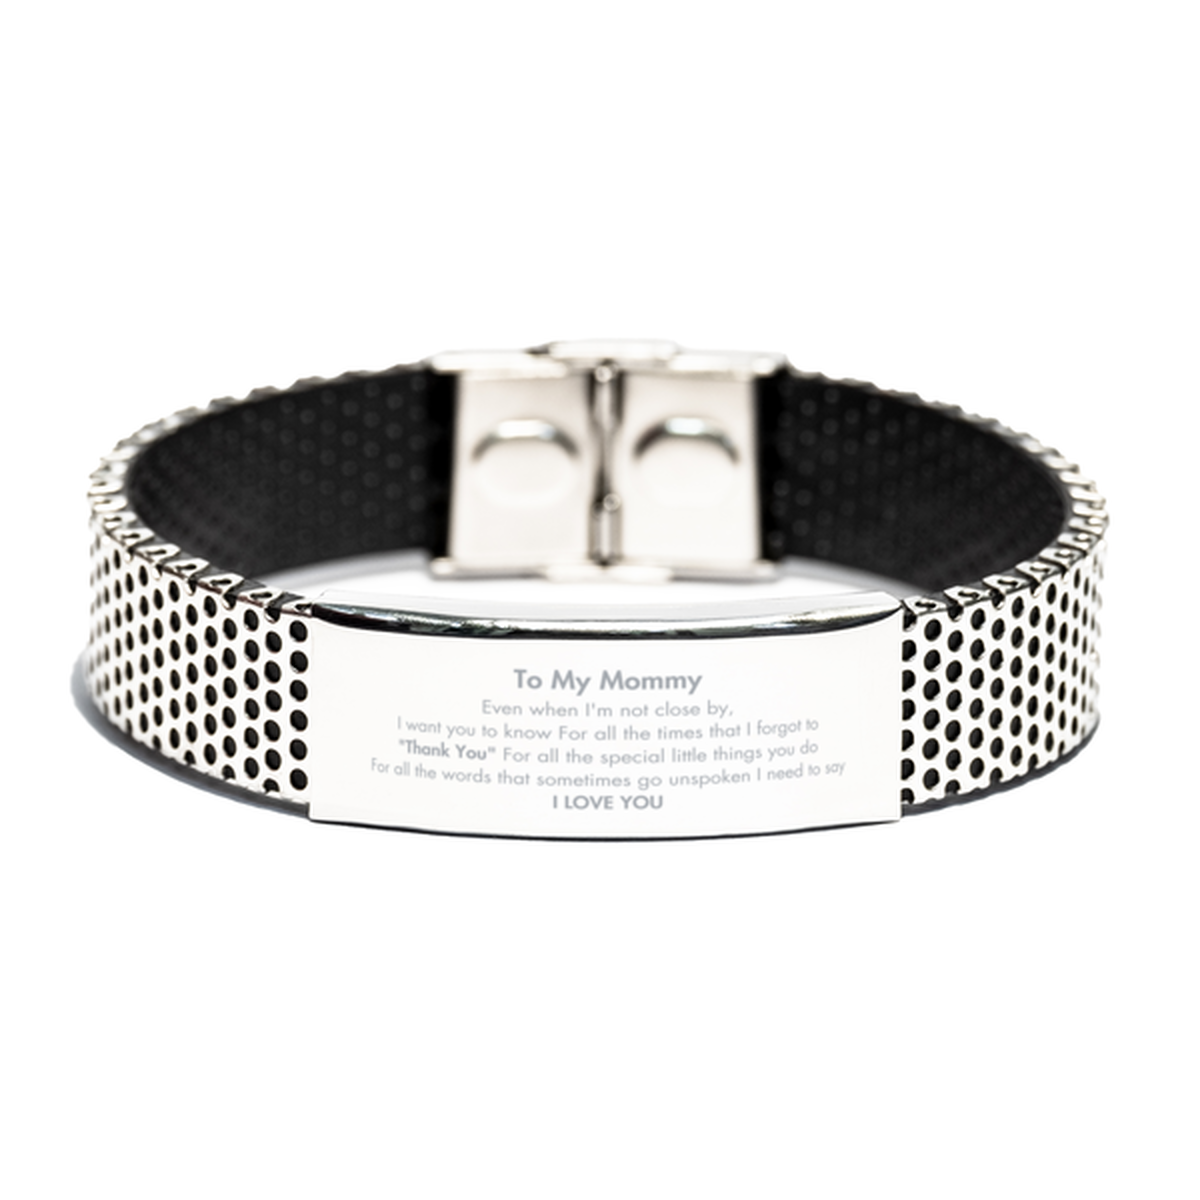 Thank You Gifts for Mommy, Keepsake Stainless Steel Bracelet Gifts for Mommy Birthday Mother's day Father's Day Mommy For all the words That sometimes go unspoken I need to say I LOVE YOU